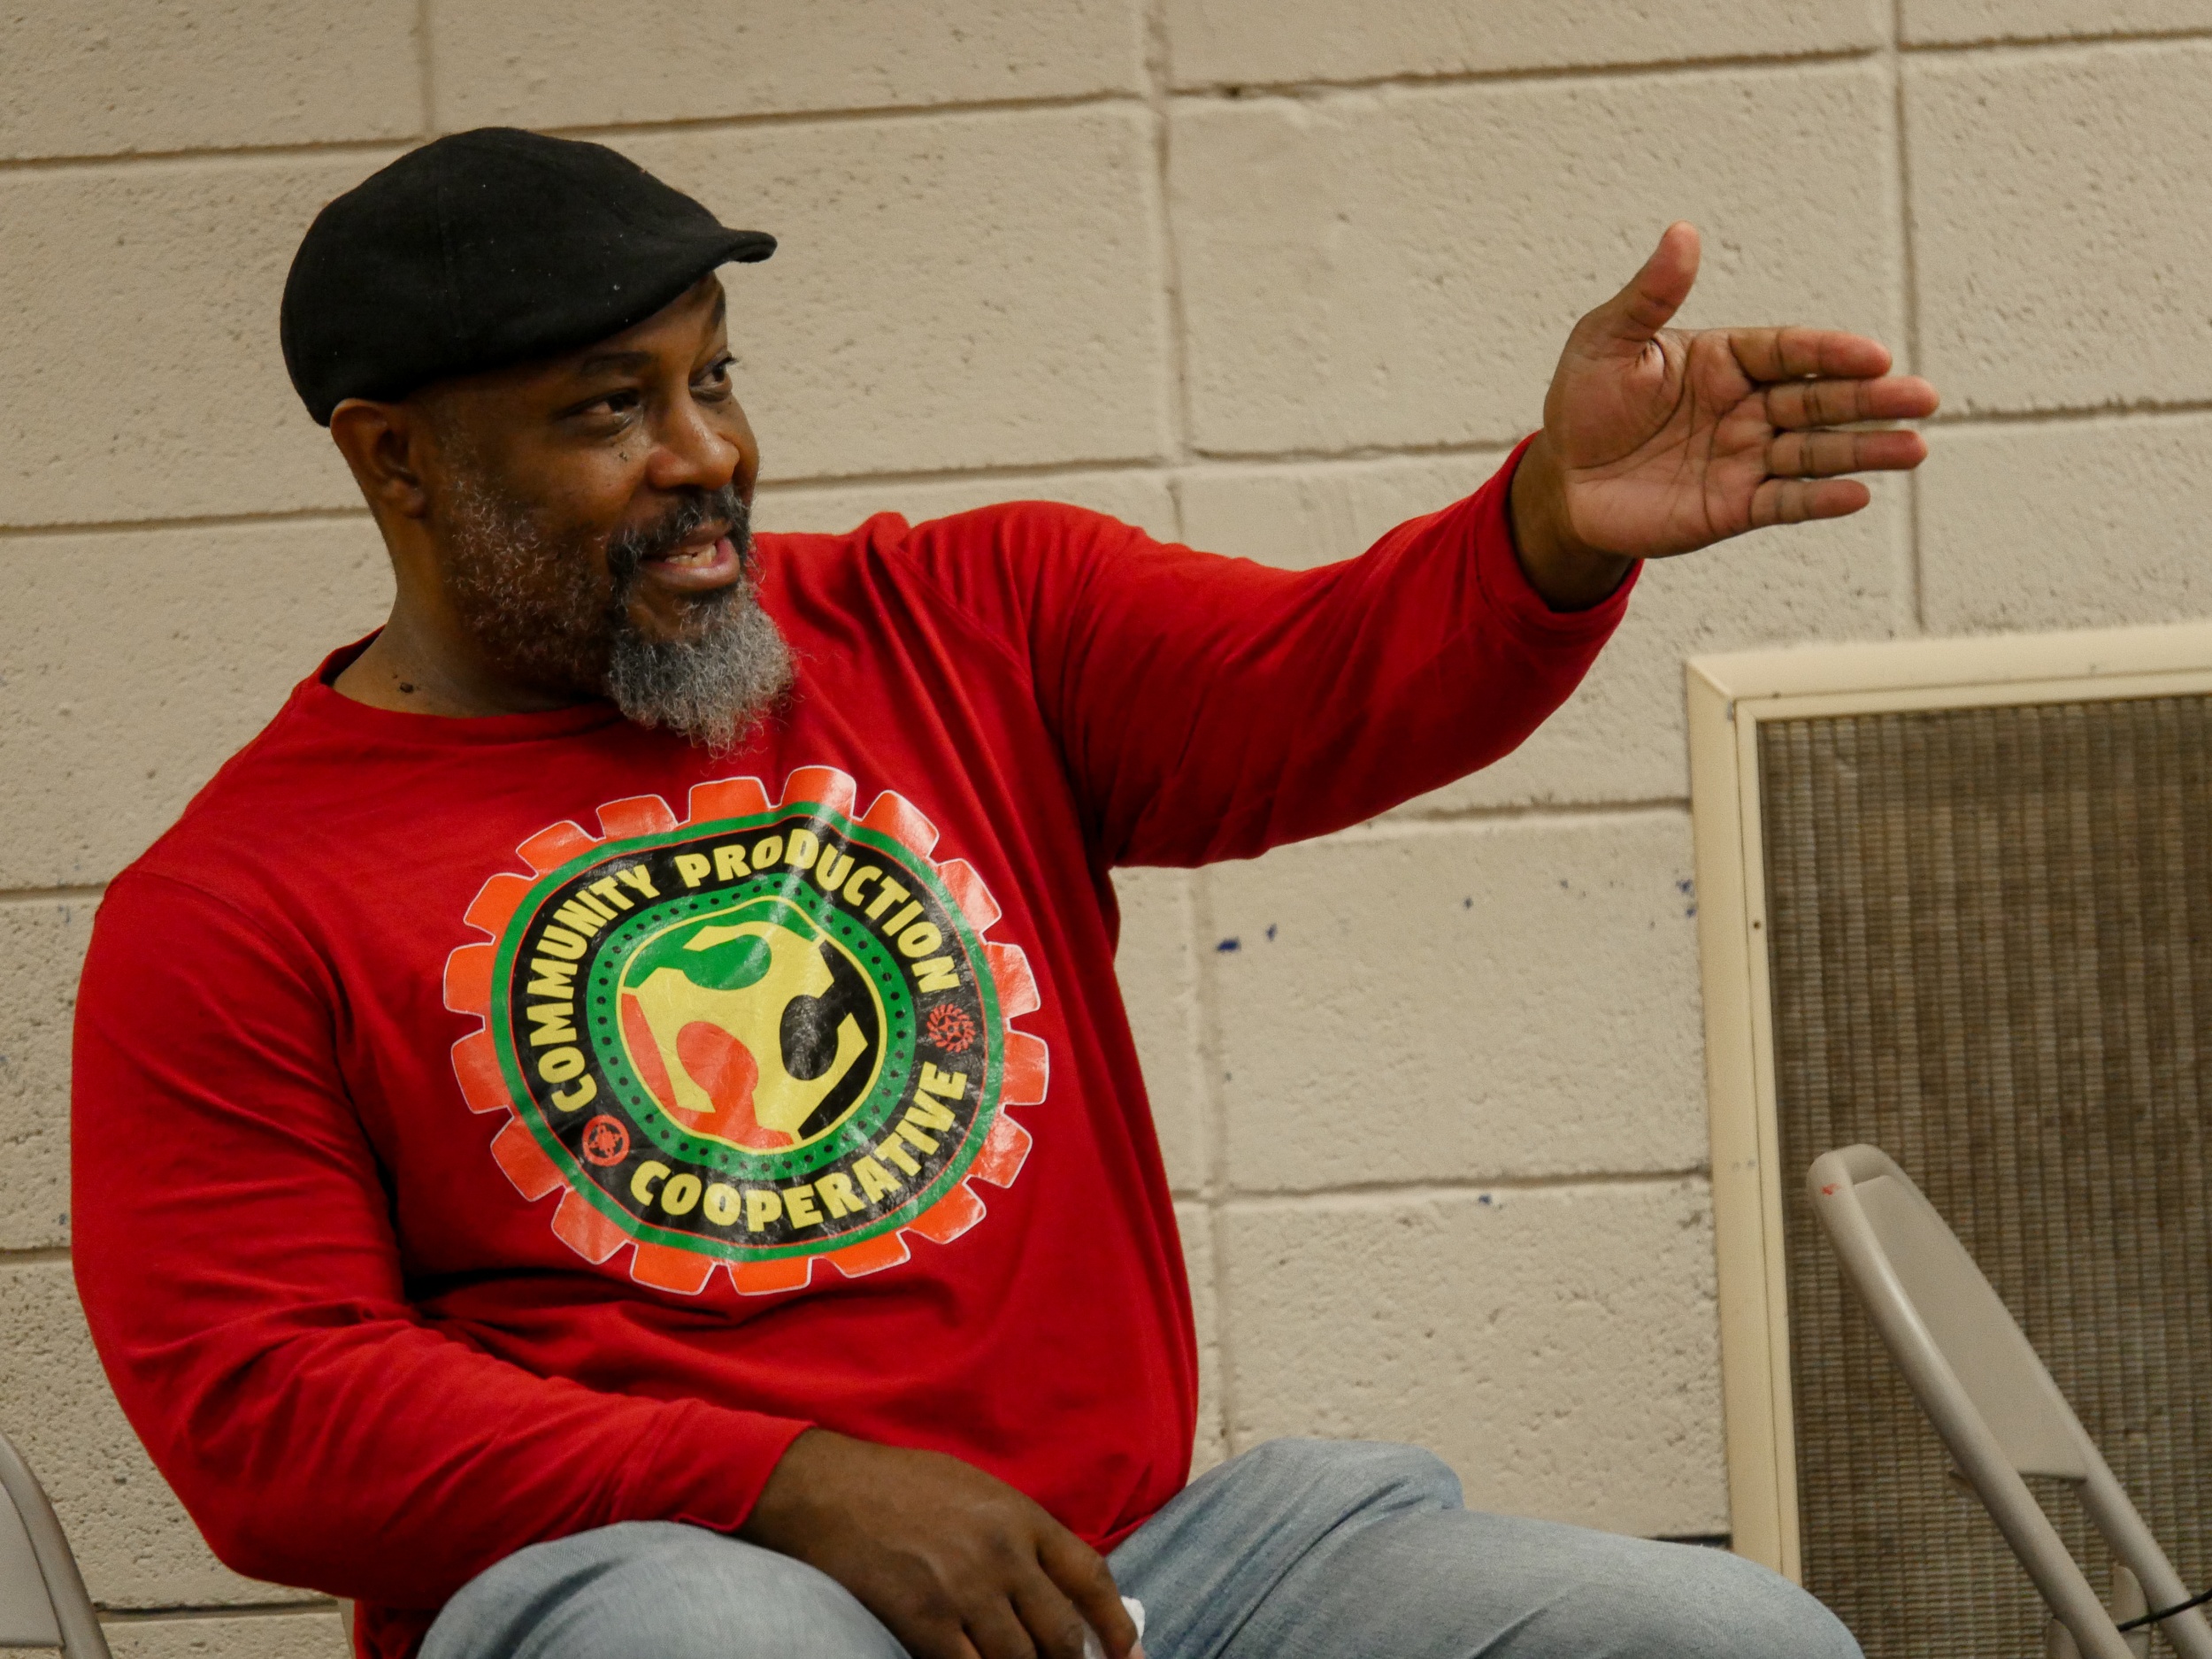 A man seated in front of a cinderblock wall wearing a black cap, red long-sleeve t-shirt, and jeans, gestures while talking